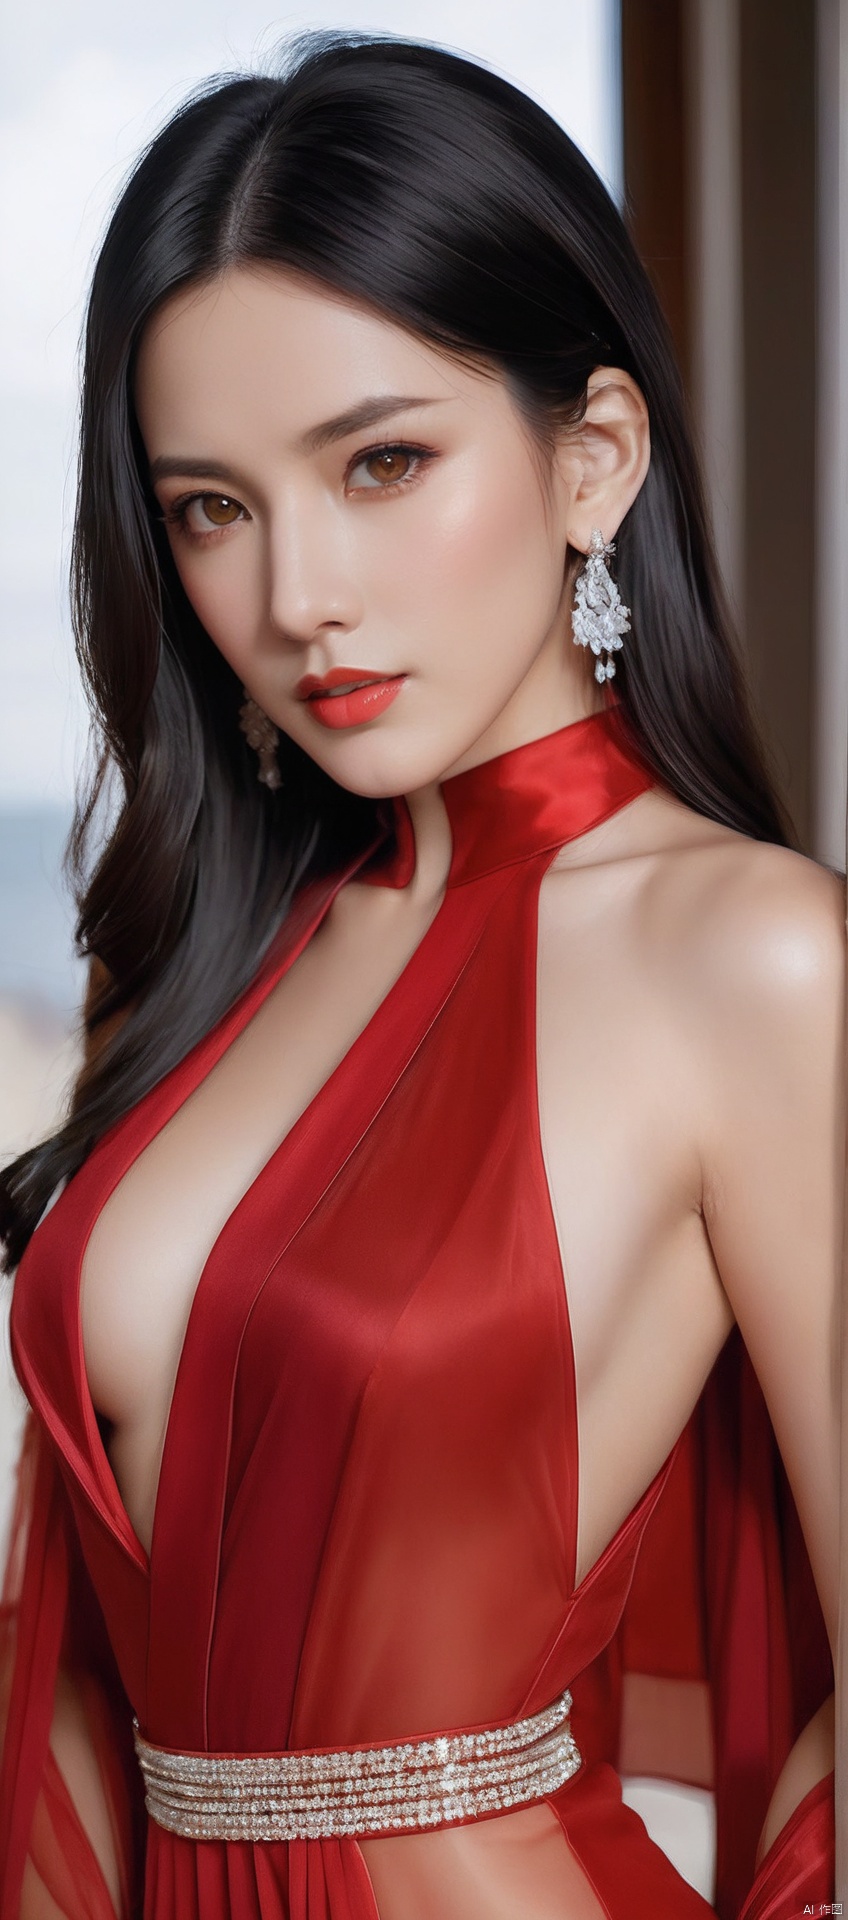 8k,RAW, Fujifilm XT3, masterpiece, best quality, photorealistic,1girl,solo, diamond stud earrings, long straight black hair, hazel eyes, serious expression, slender figure,(upper body shot), (upper body view),dodger red see through dress,red transparent shawl,beautiful symmetrical face,in the style of elegant clothing,high heels,g002,g001,